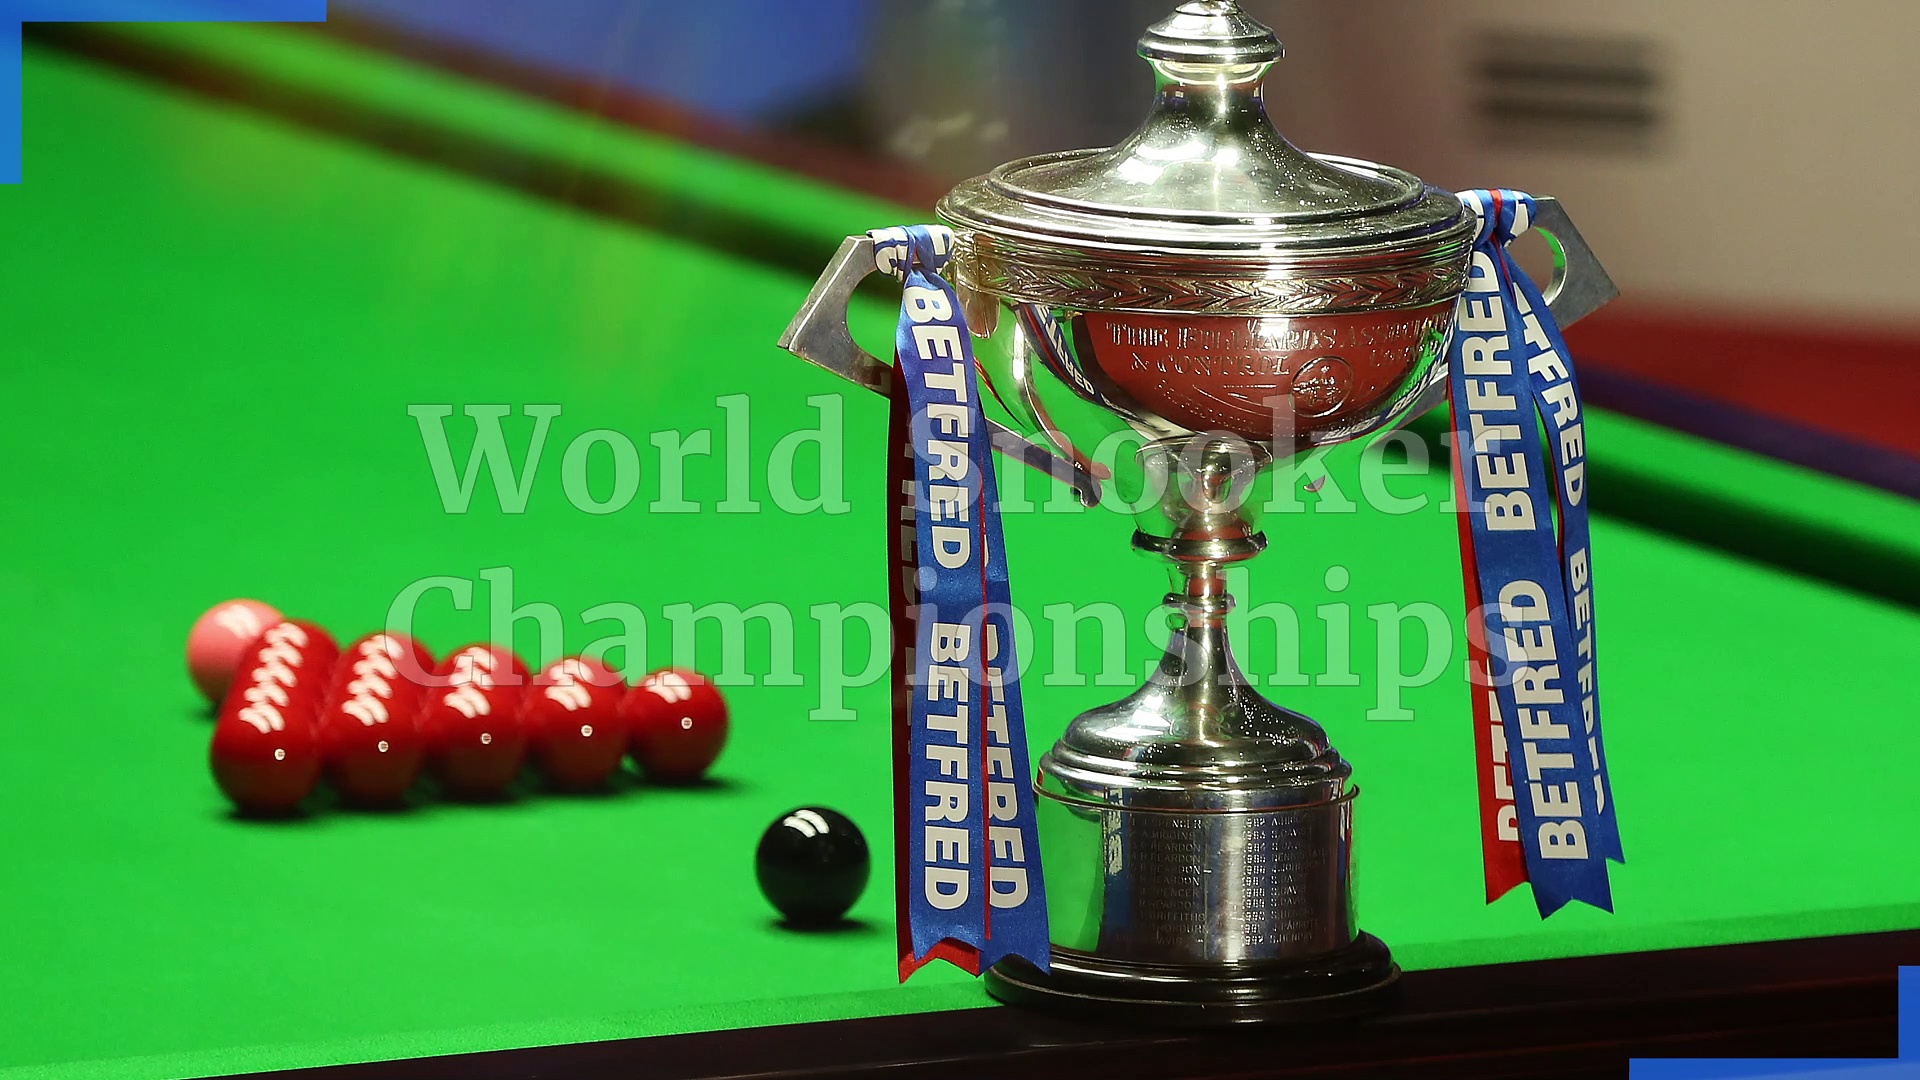 How much does the winner of World Snooker Championship get?